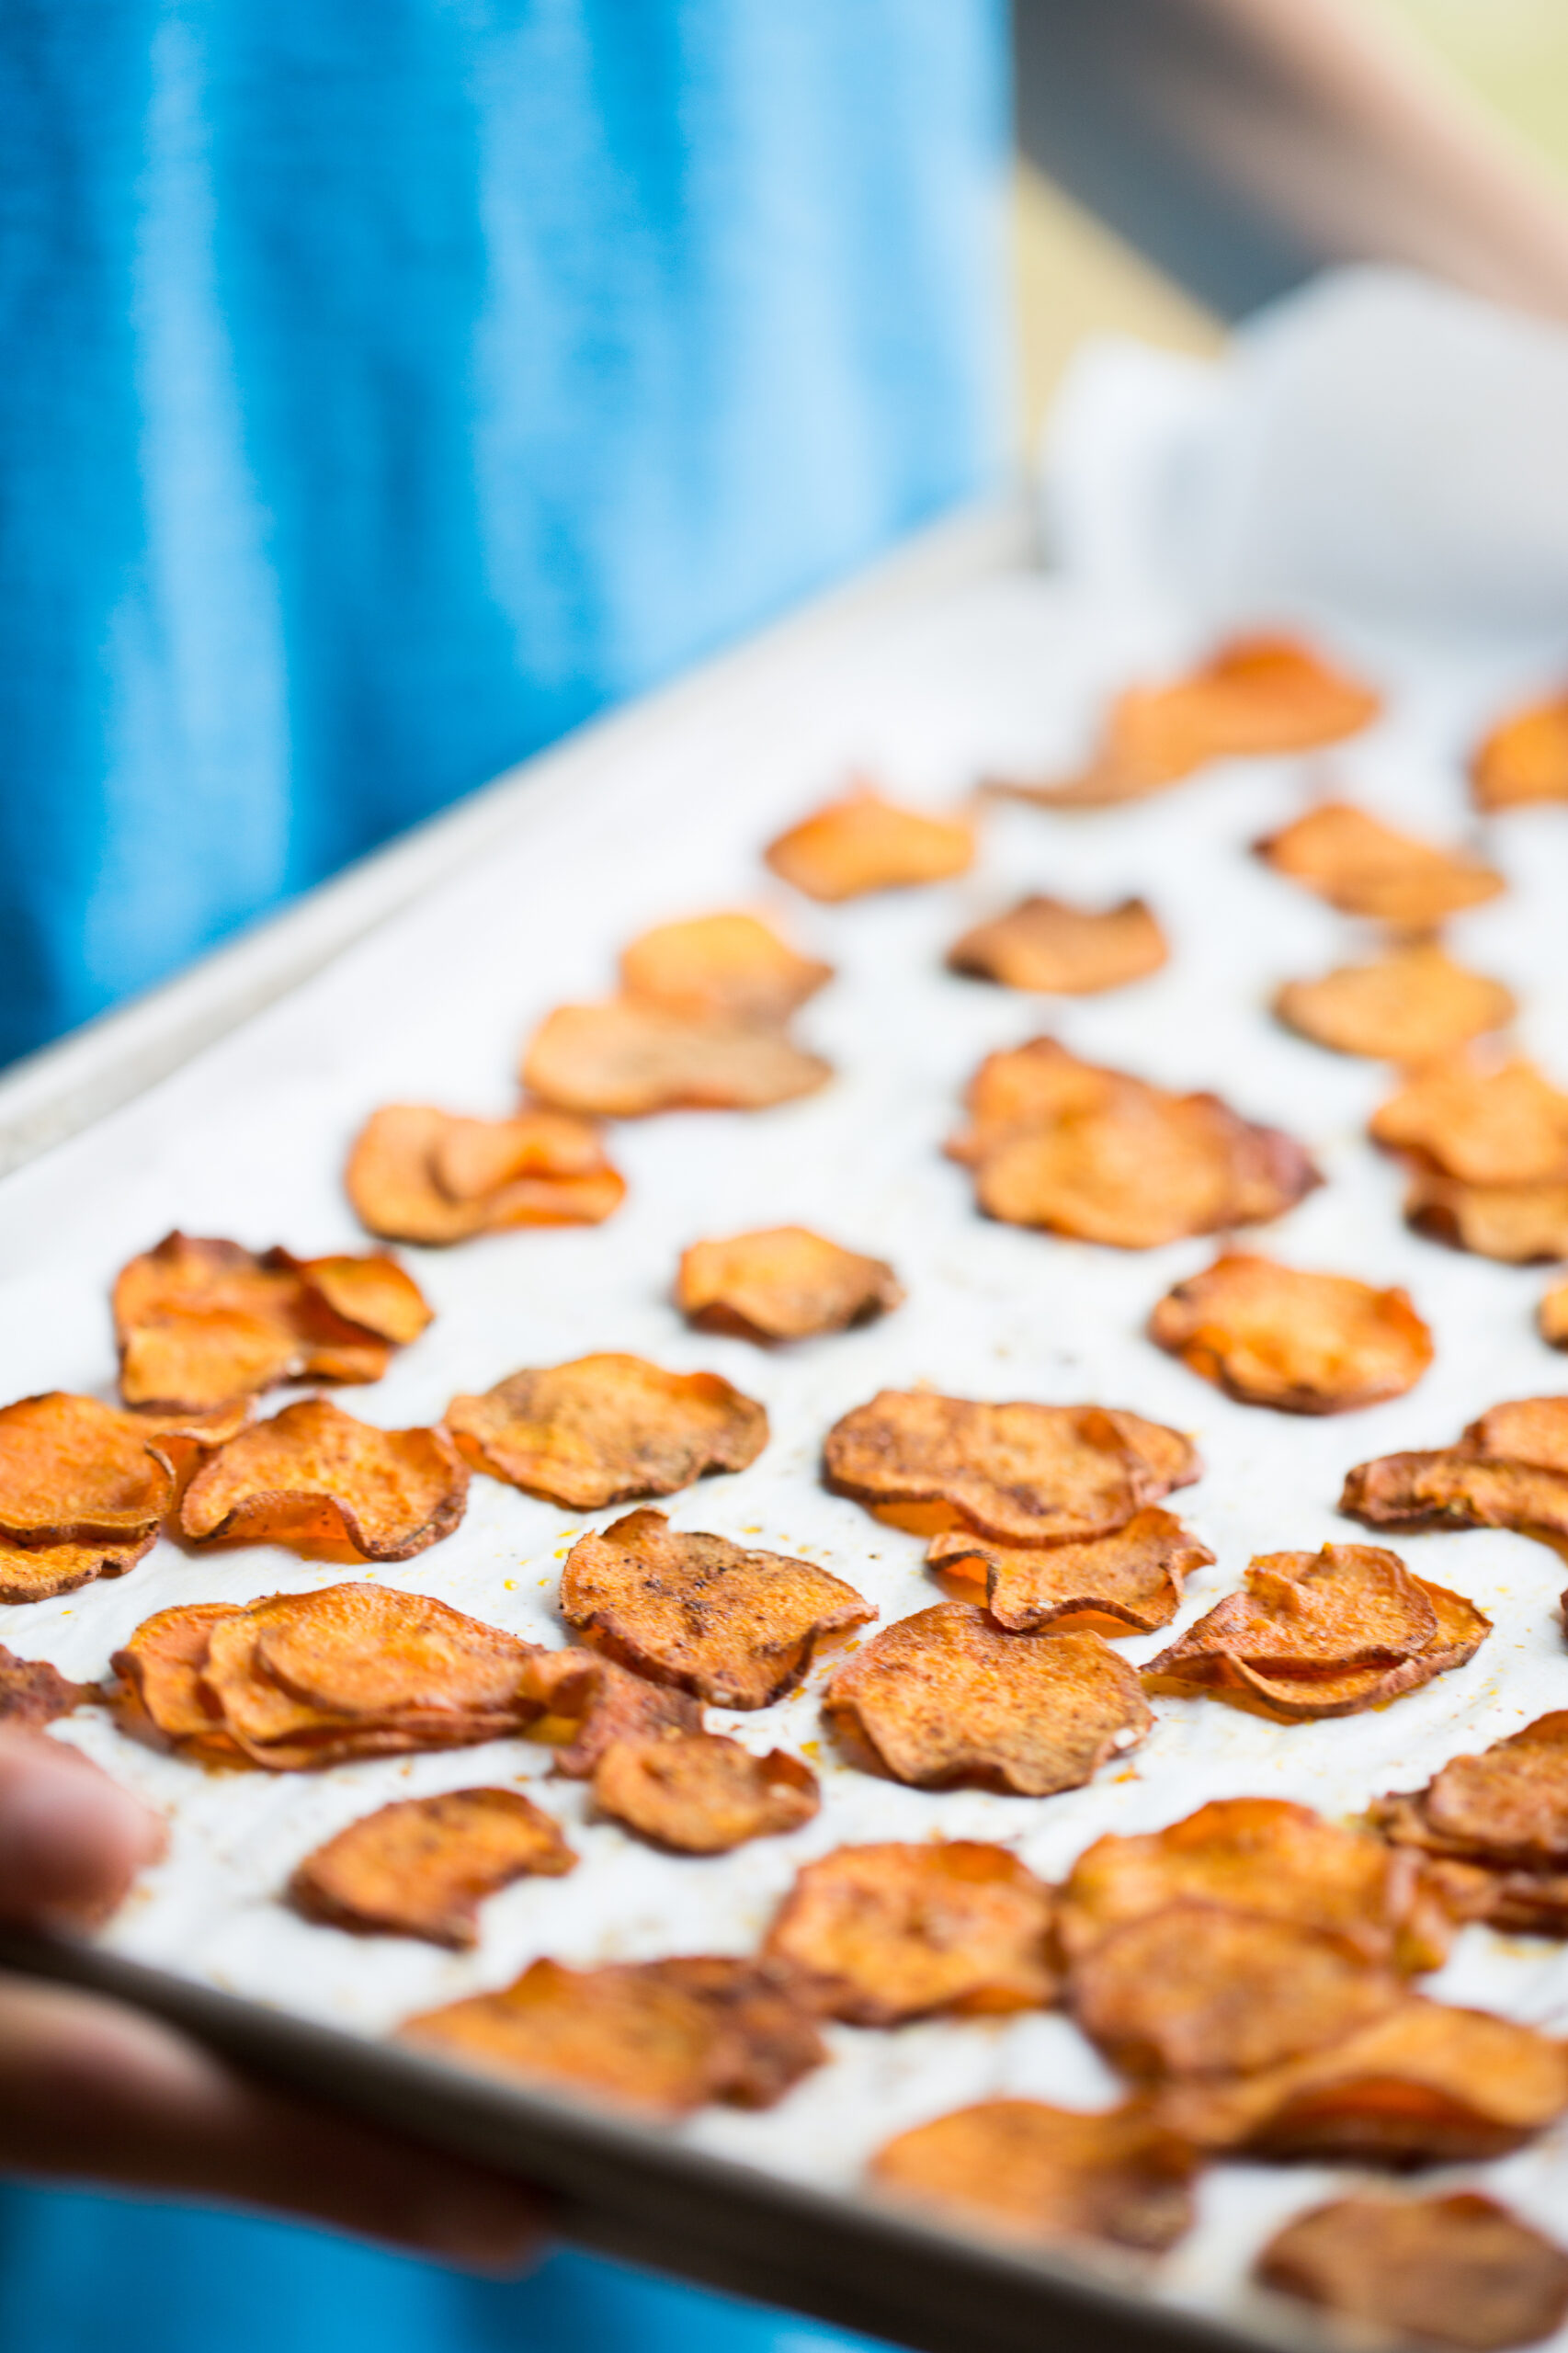 Just out of the oven sweet potato chips baked chips on a tray.